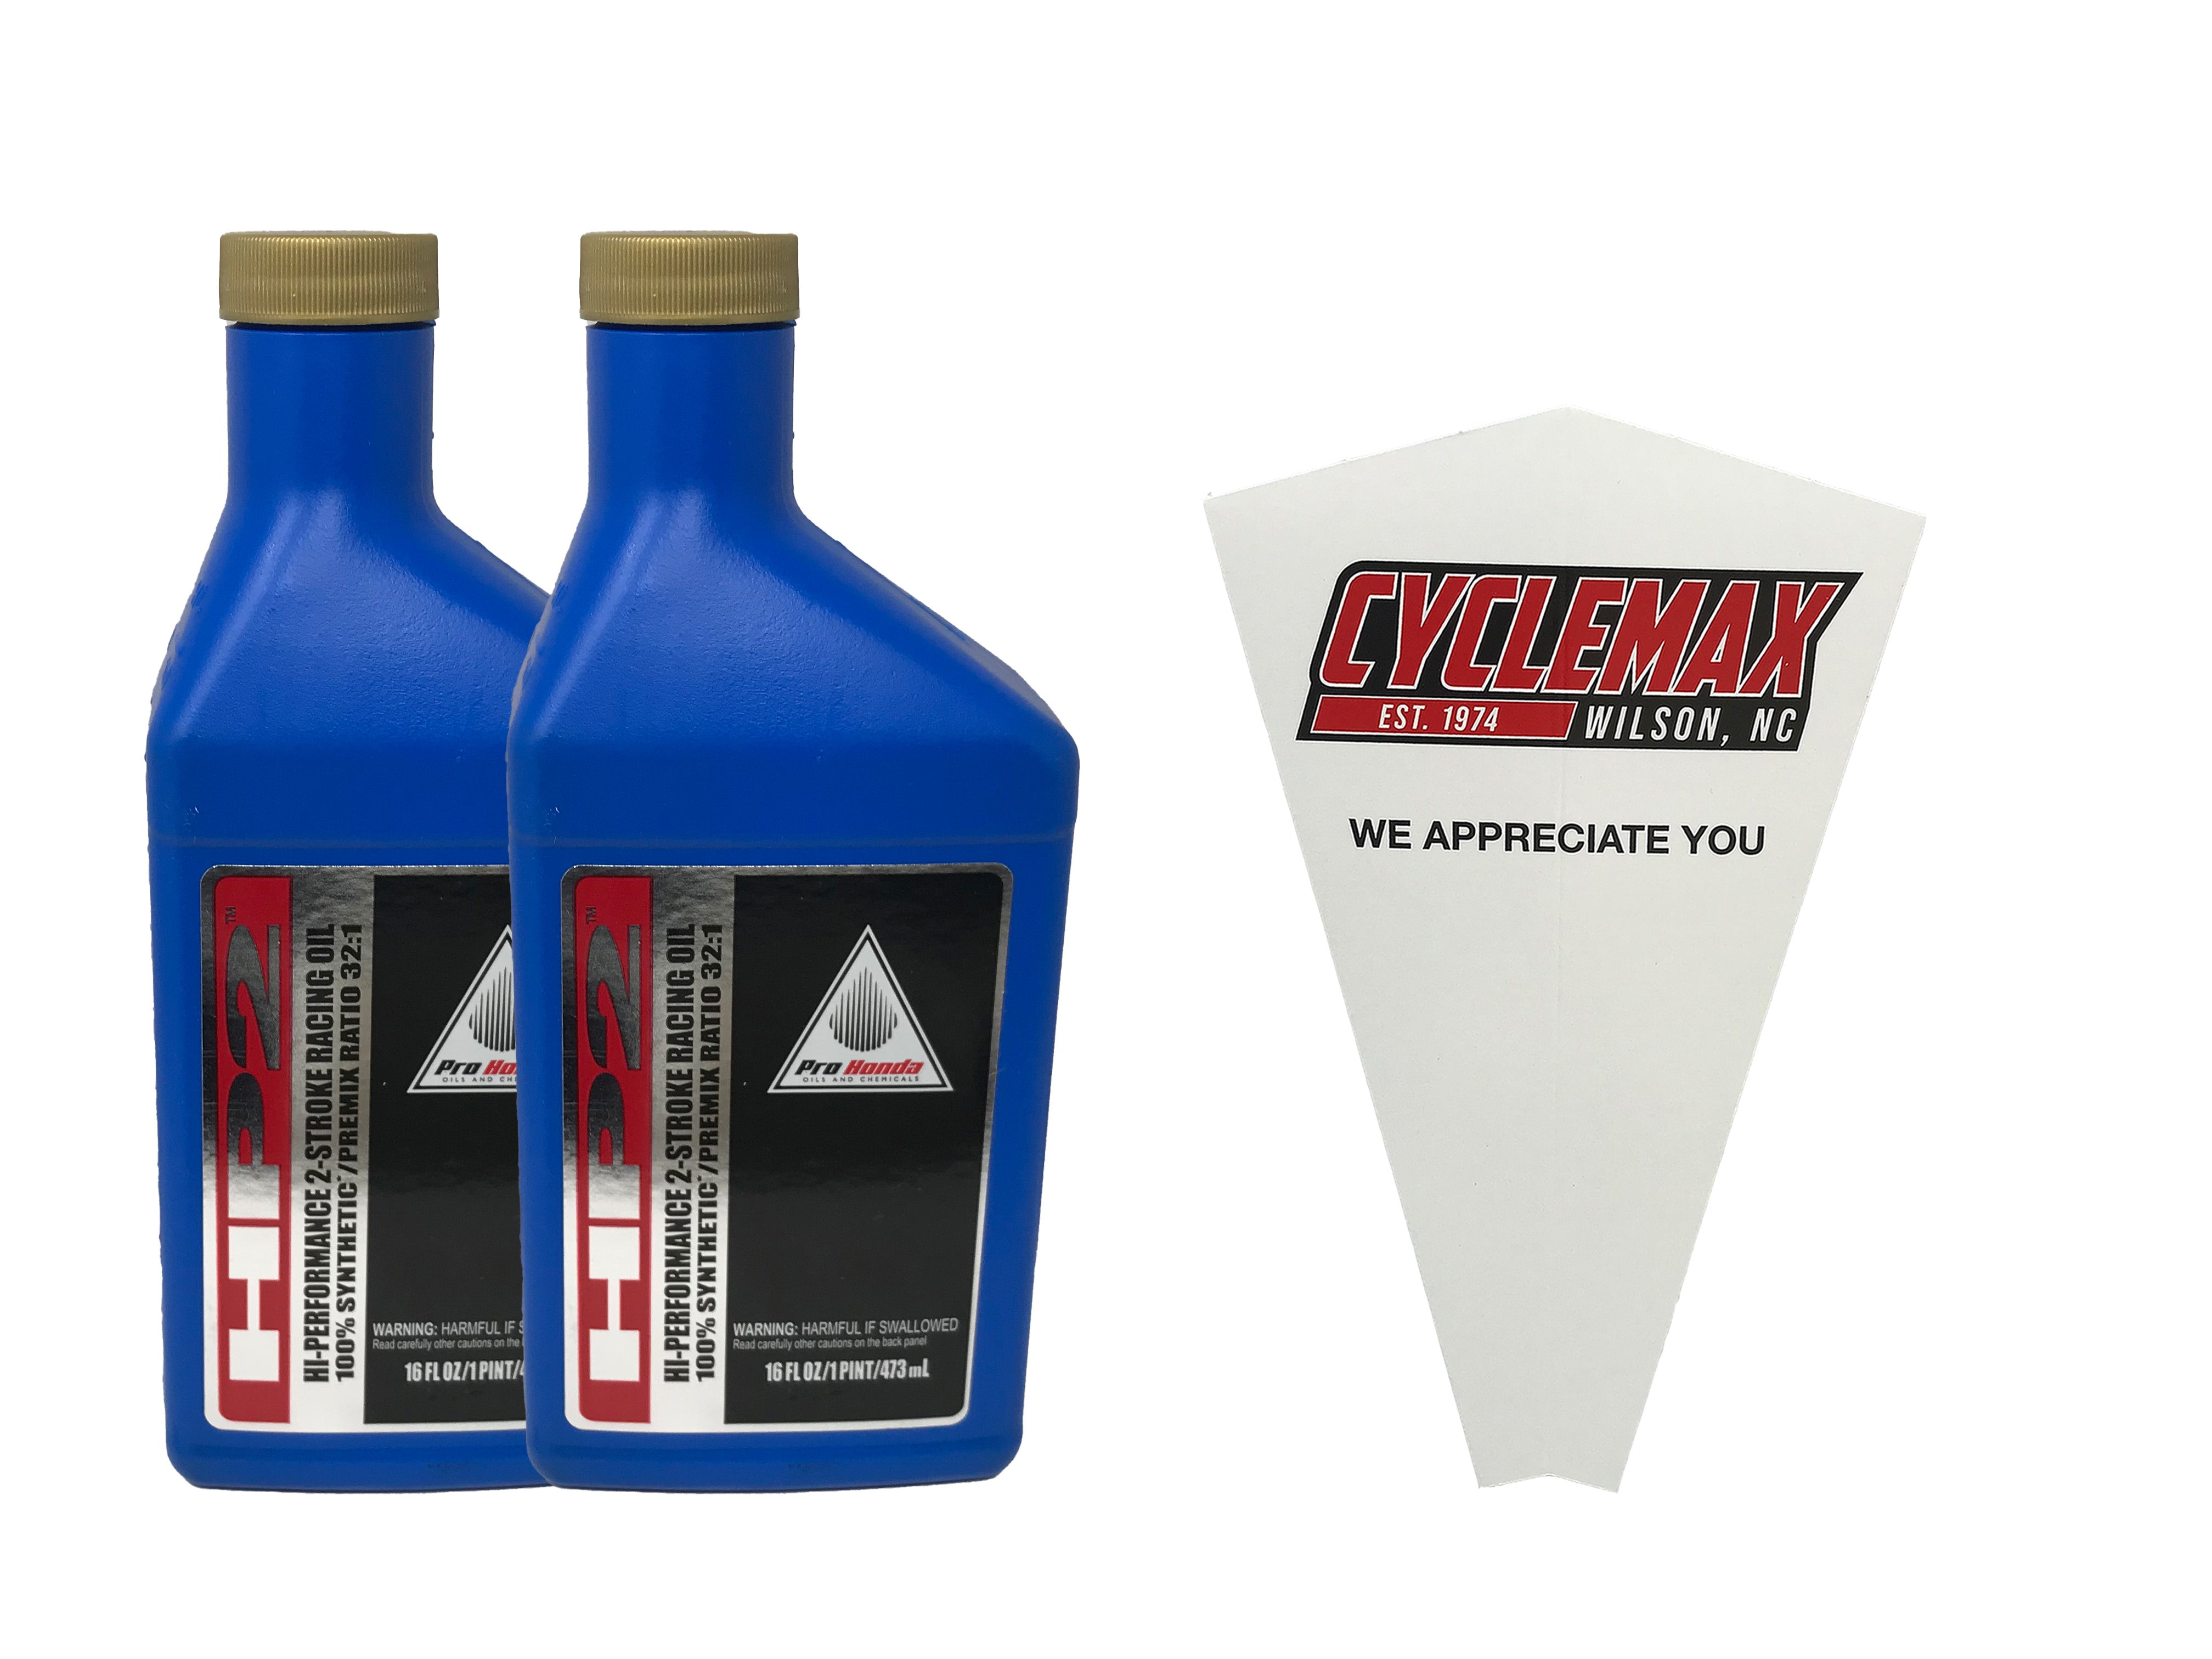 Cyclemax Two Pack for Honda HP2 Synthetic 2 Stroke Oil Pint 08C35-AH21S01 Contains Two 16oz Bottles and a Funnel